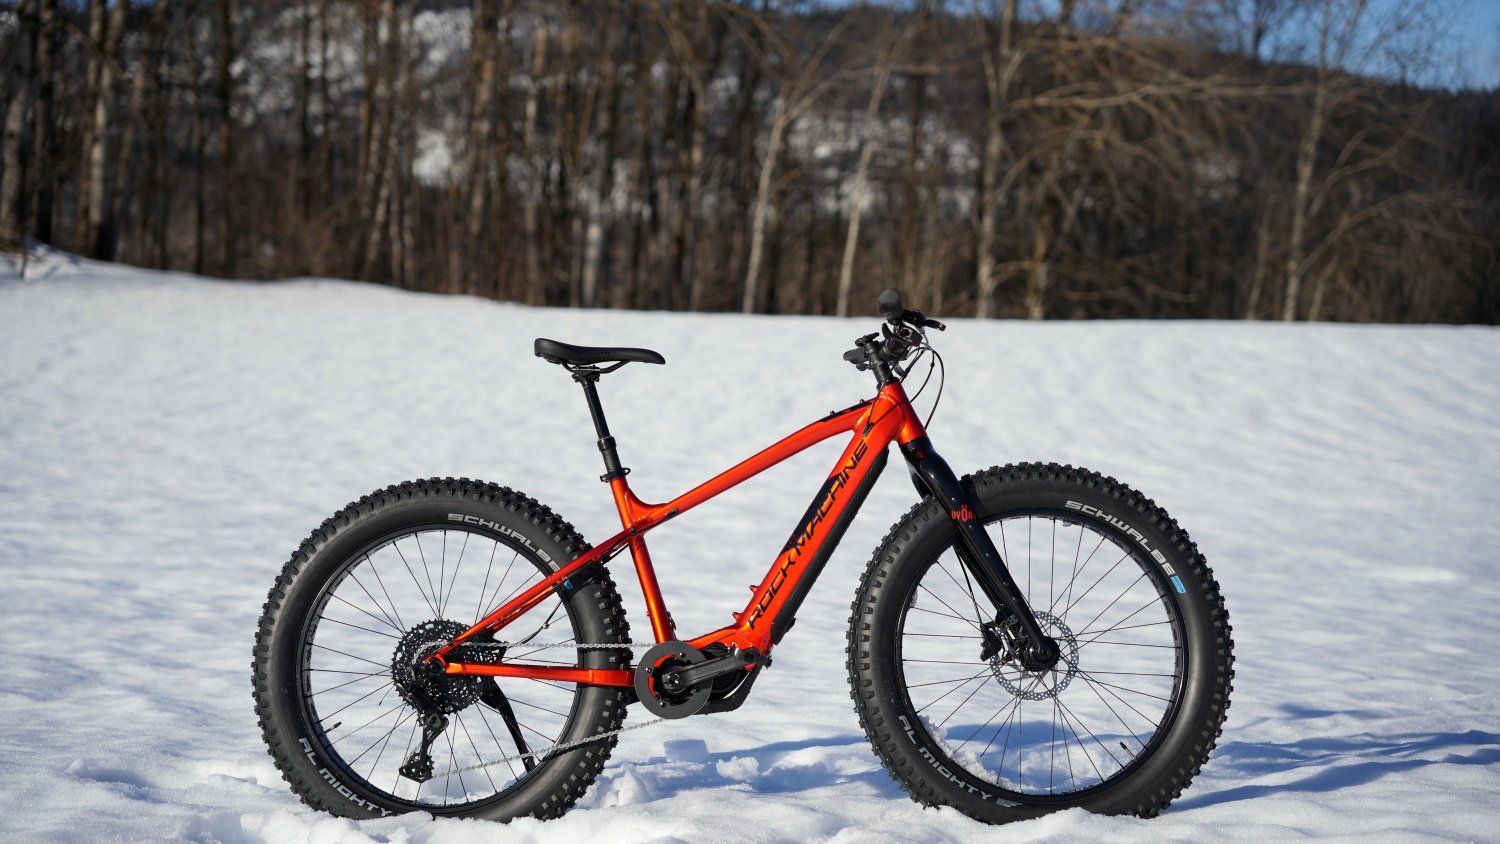 Rock Machine Vyöry e70 – comparing and reviewing a fatbike